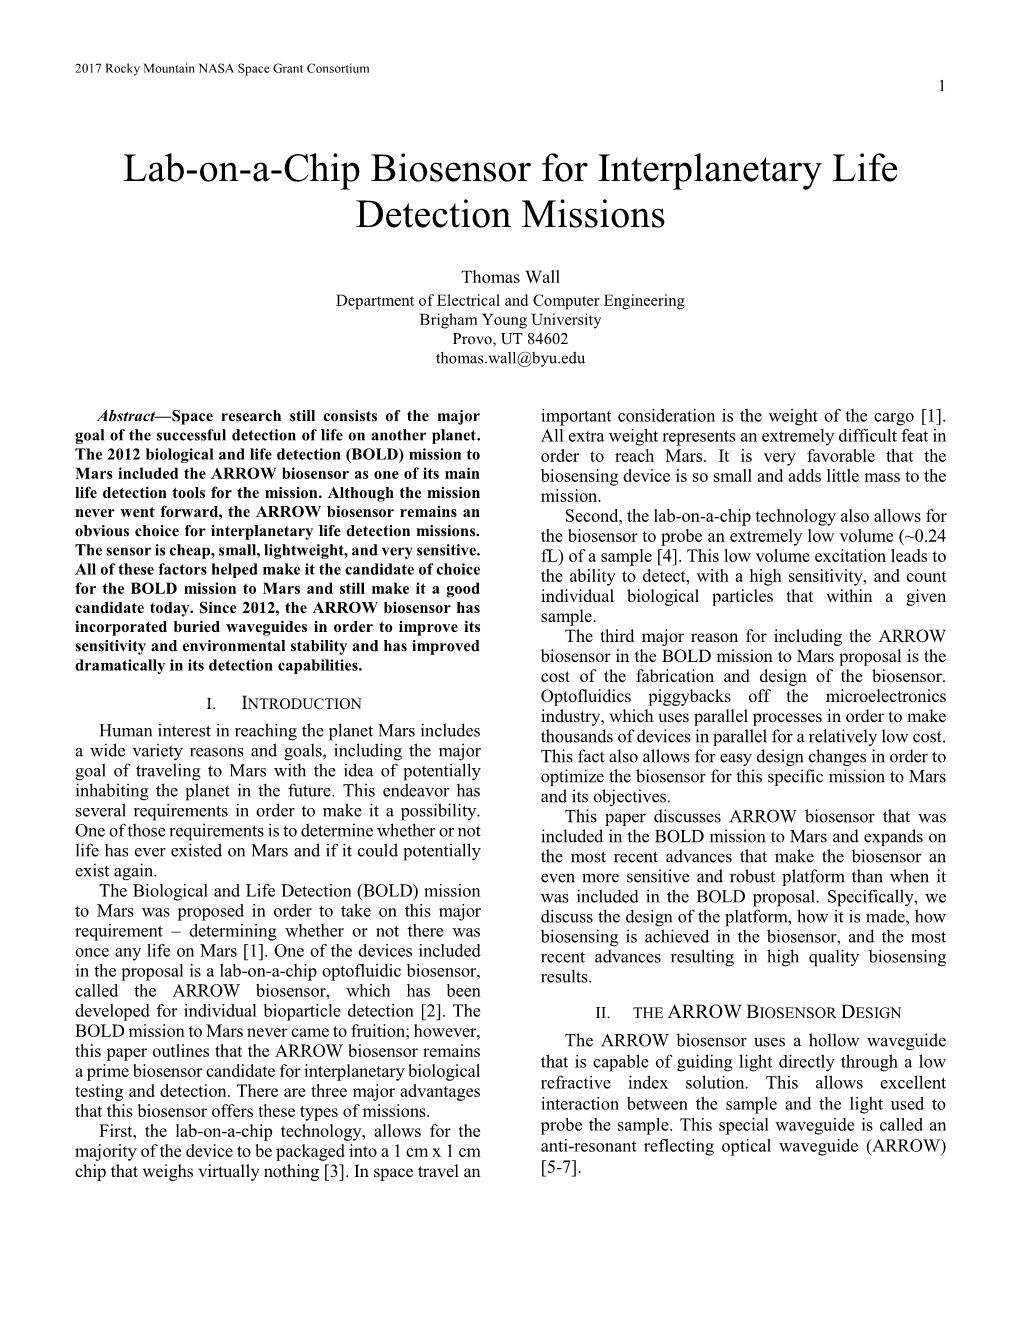 Lab-On-A-Chip Biosensor for Interplanetary Life Detection Missions